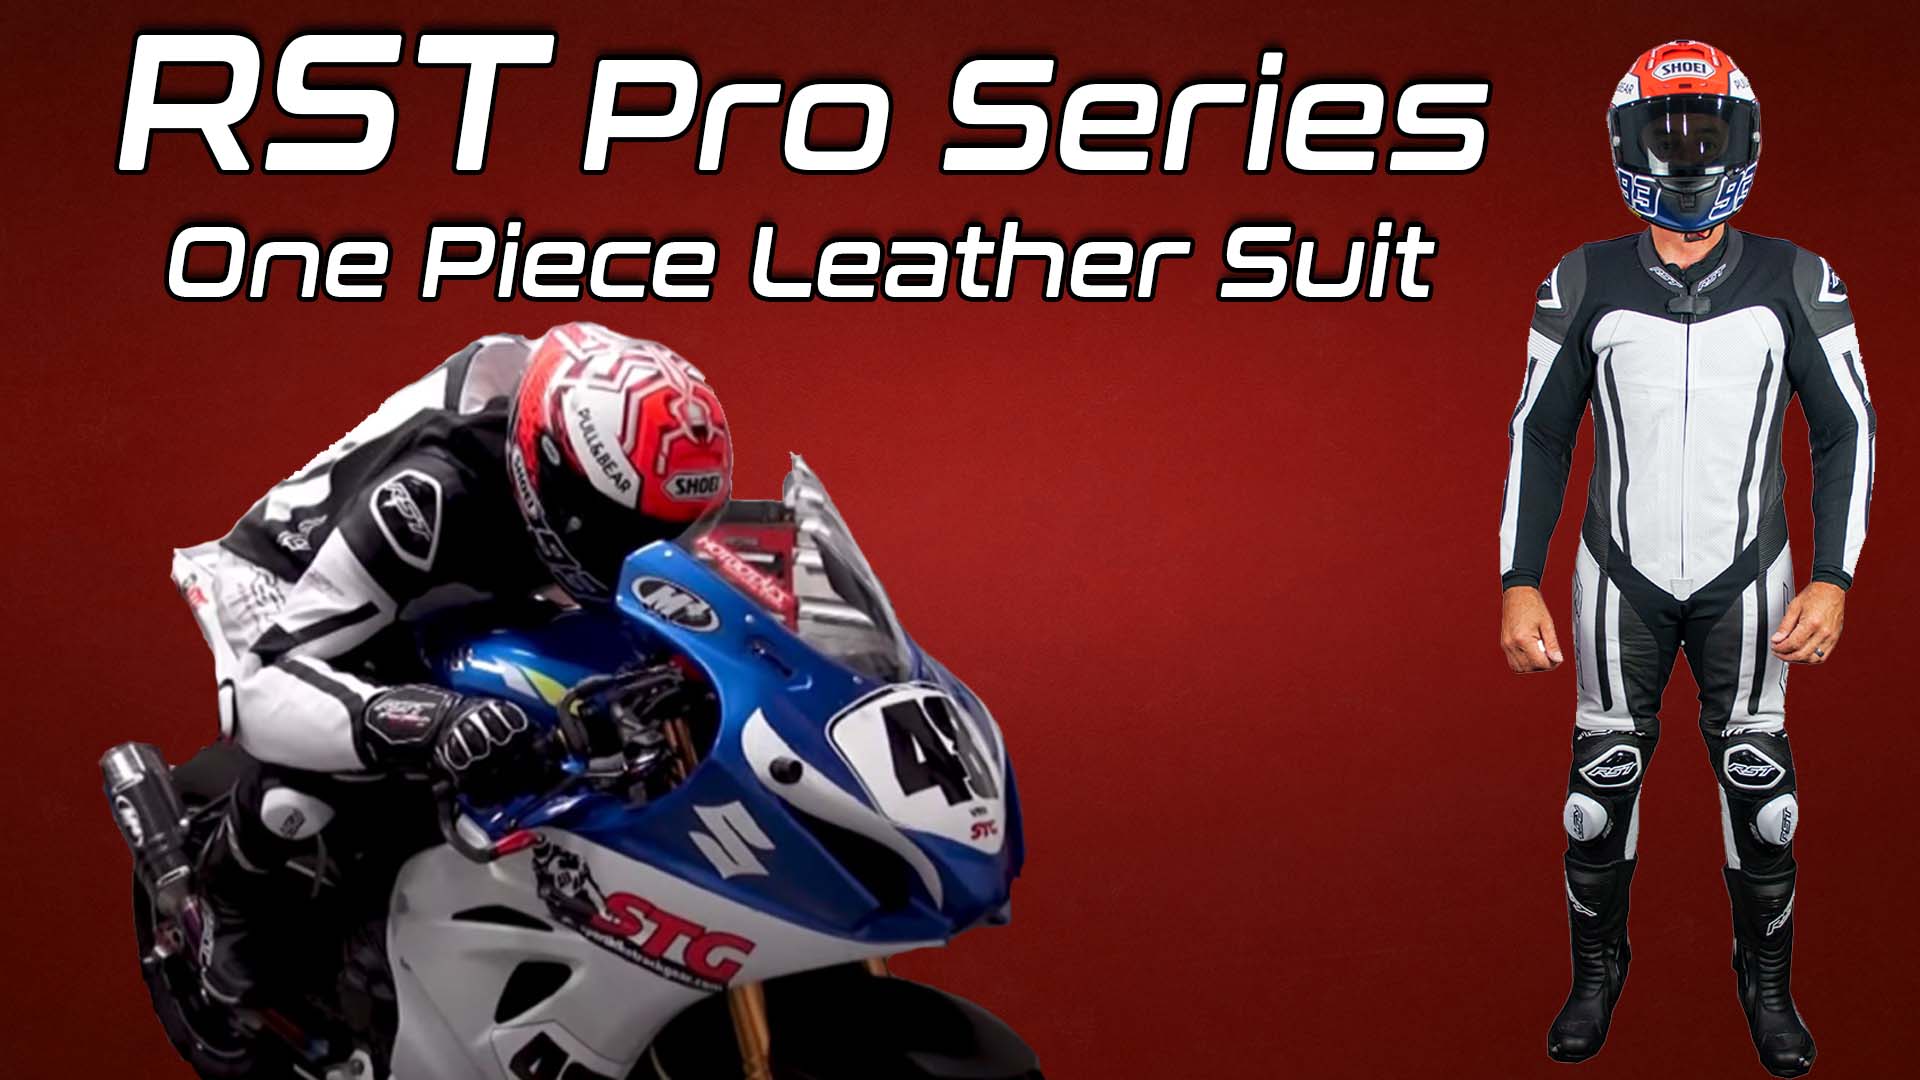 RST Pro Series One Piece Leather Race Suit